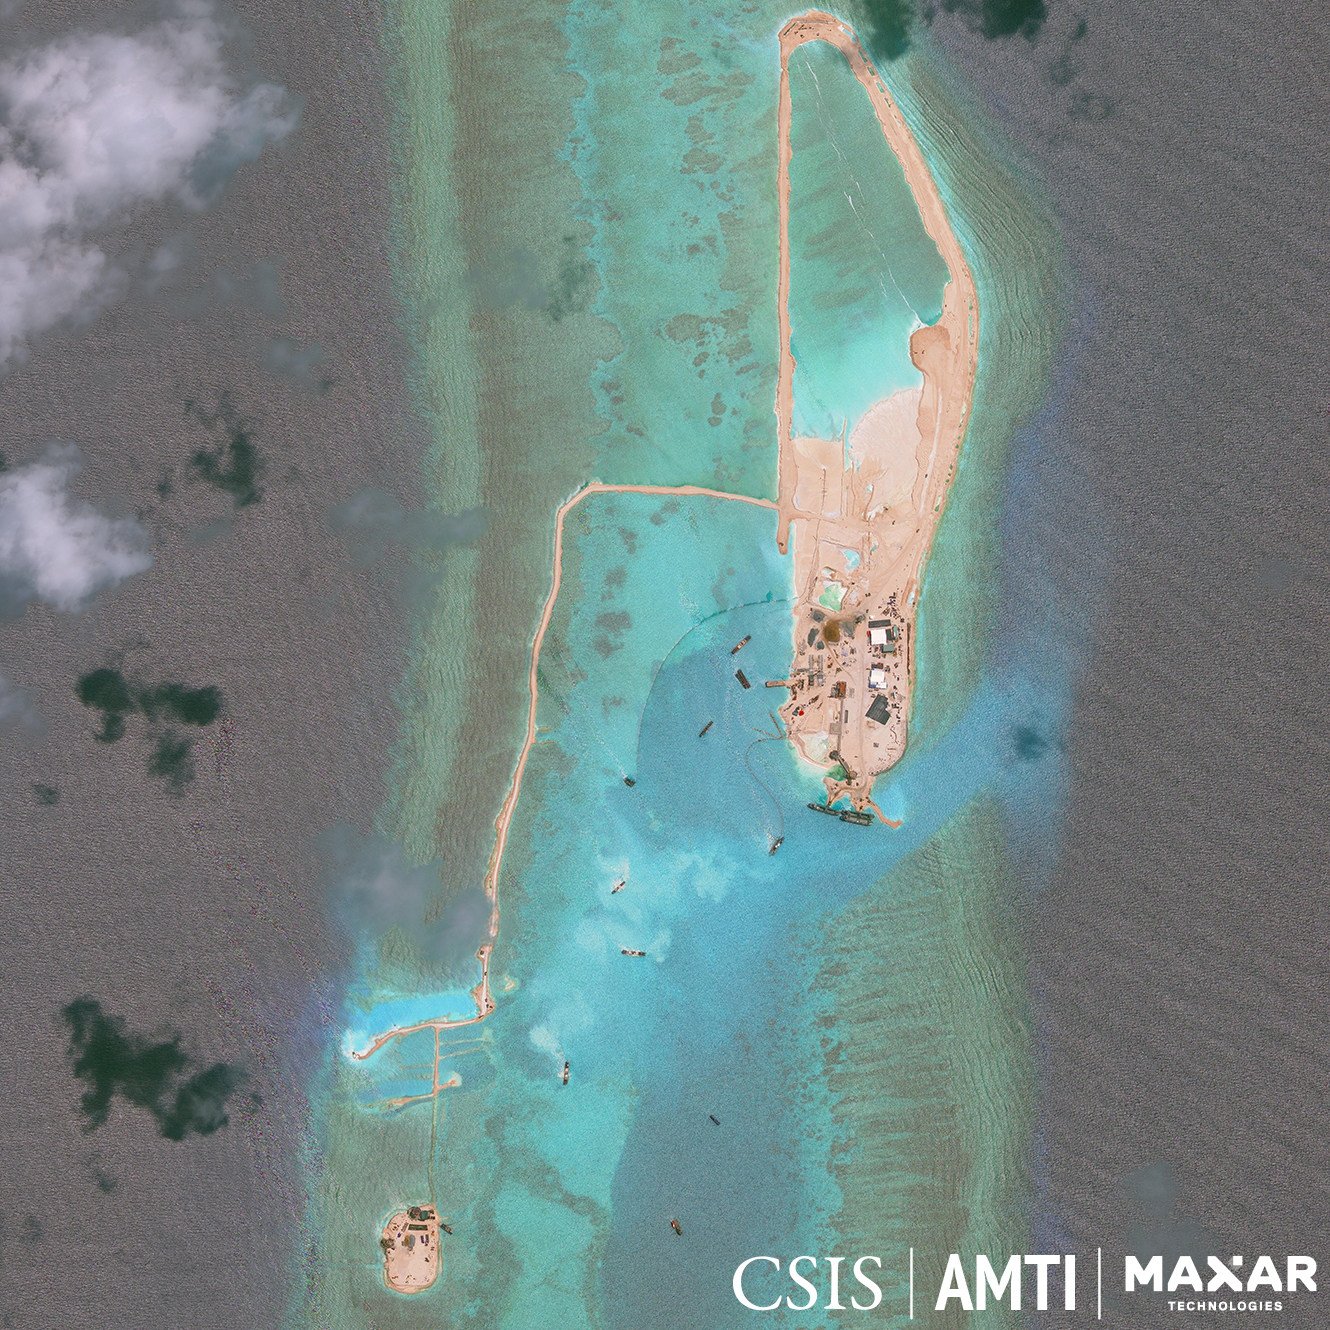 Vietnam has stepped up its construction work in the South China Sea this year:Photo: CSIS / AMTI